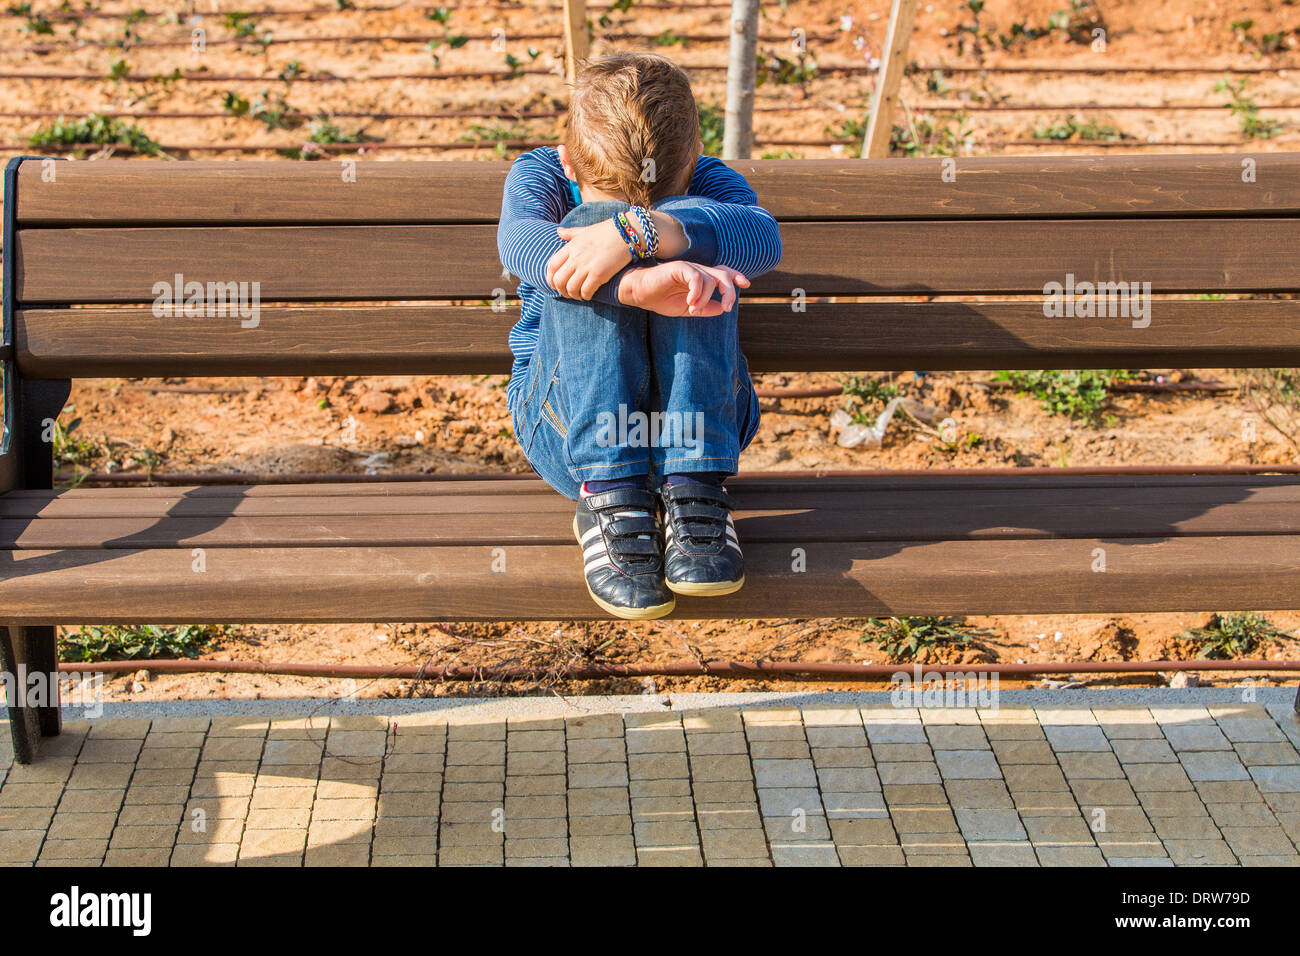 Young depressed red haired boy alone on a bench in a park Stock Photo